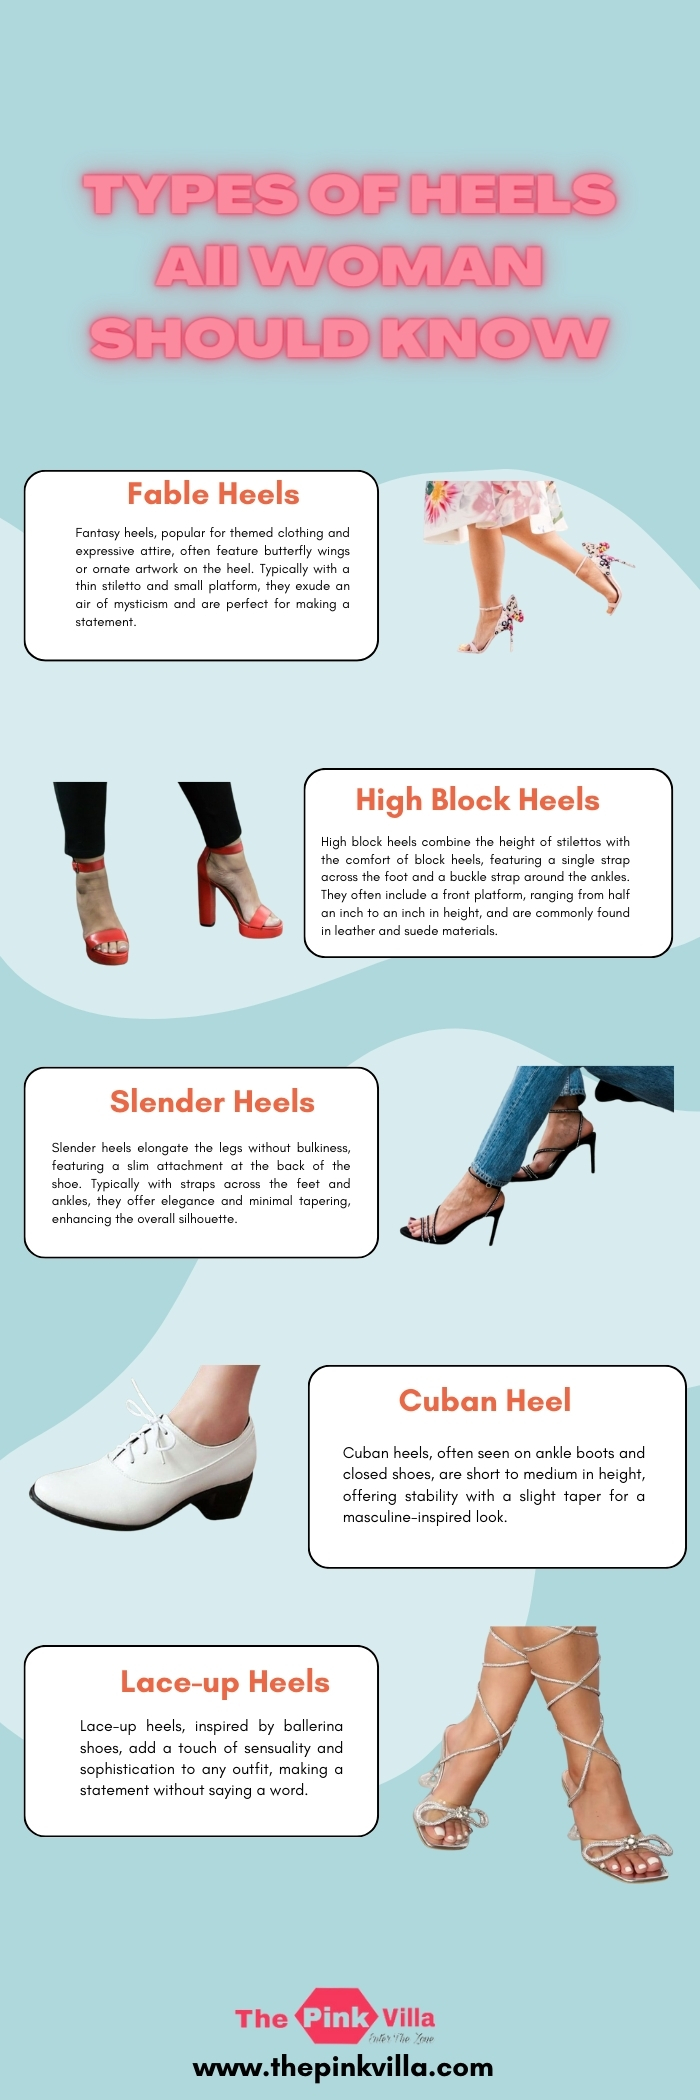 TYPES OF HEELS All WOMAN SHOULD KNOW